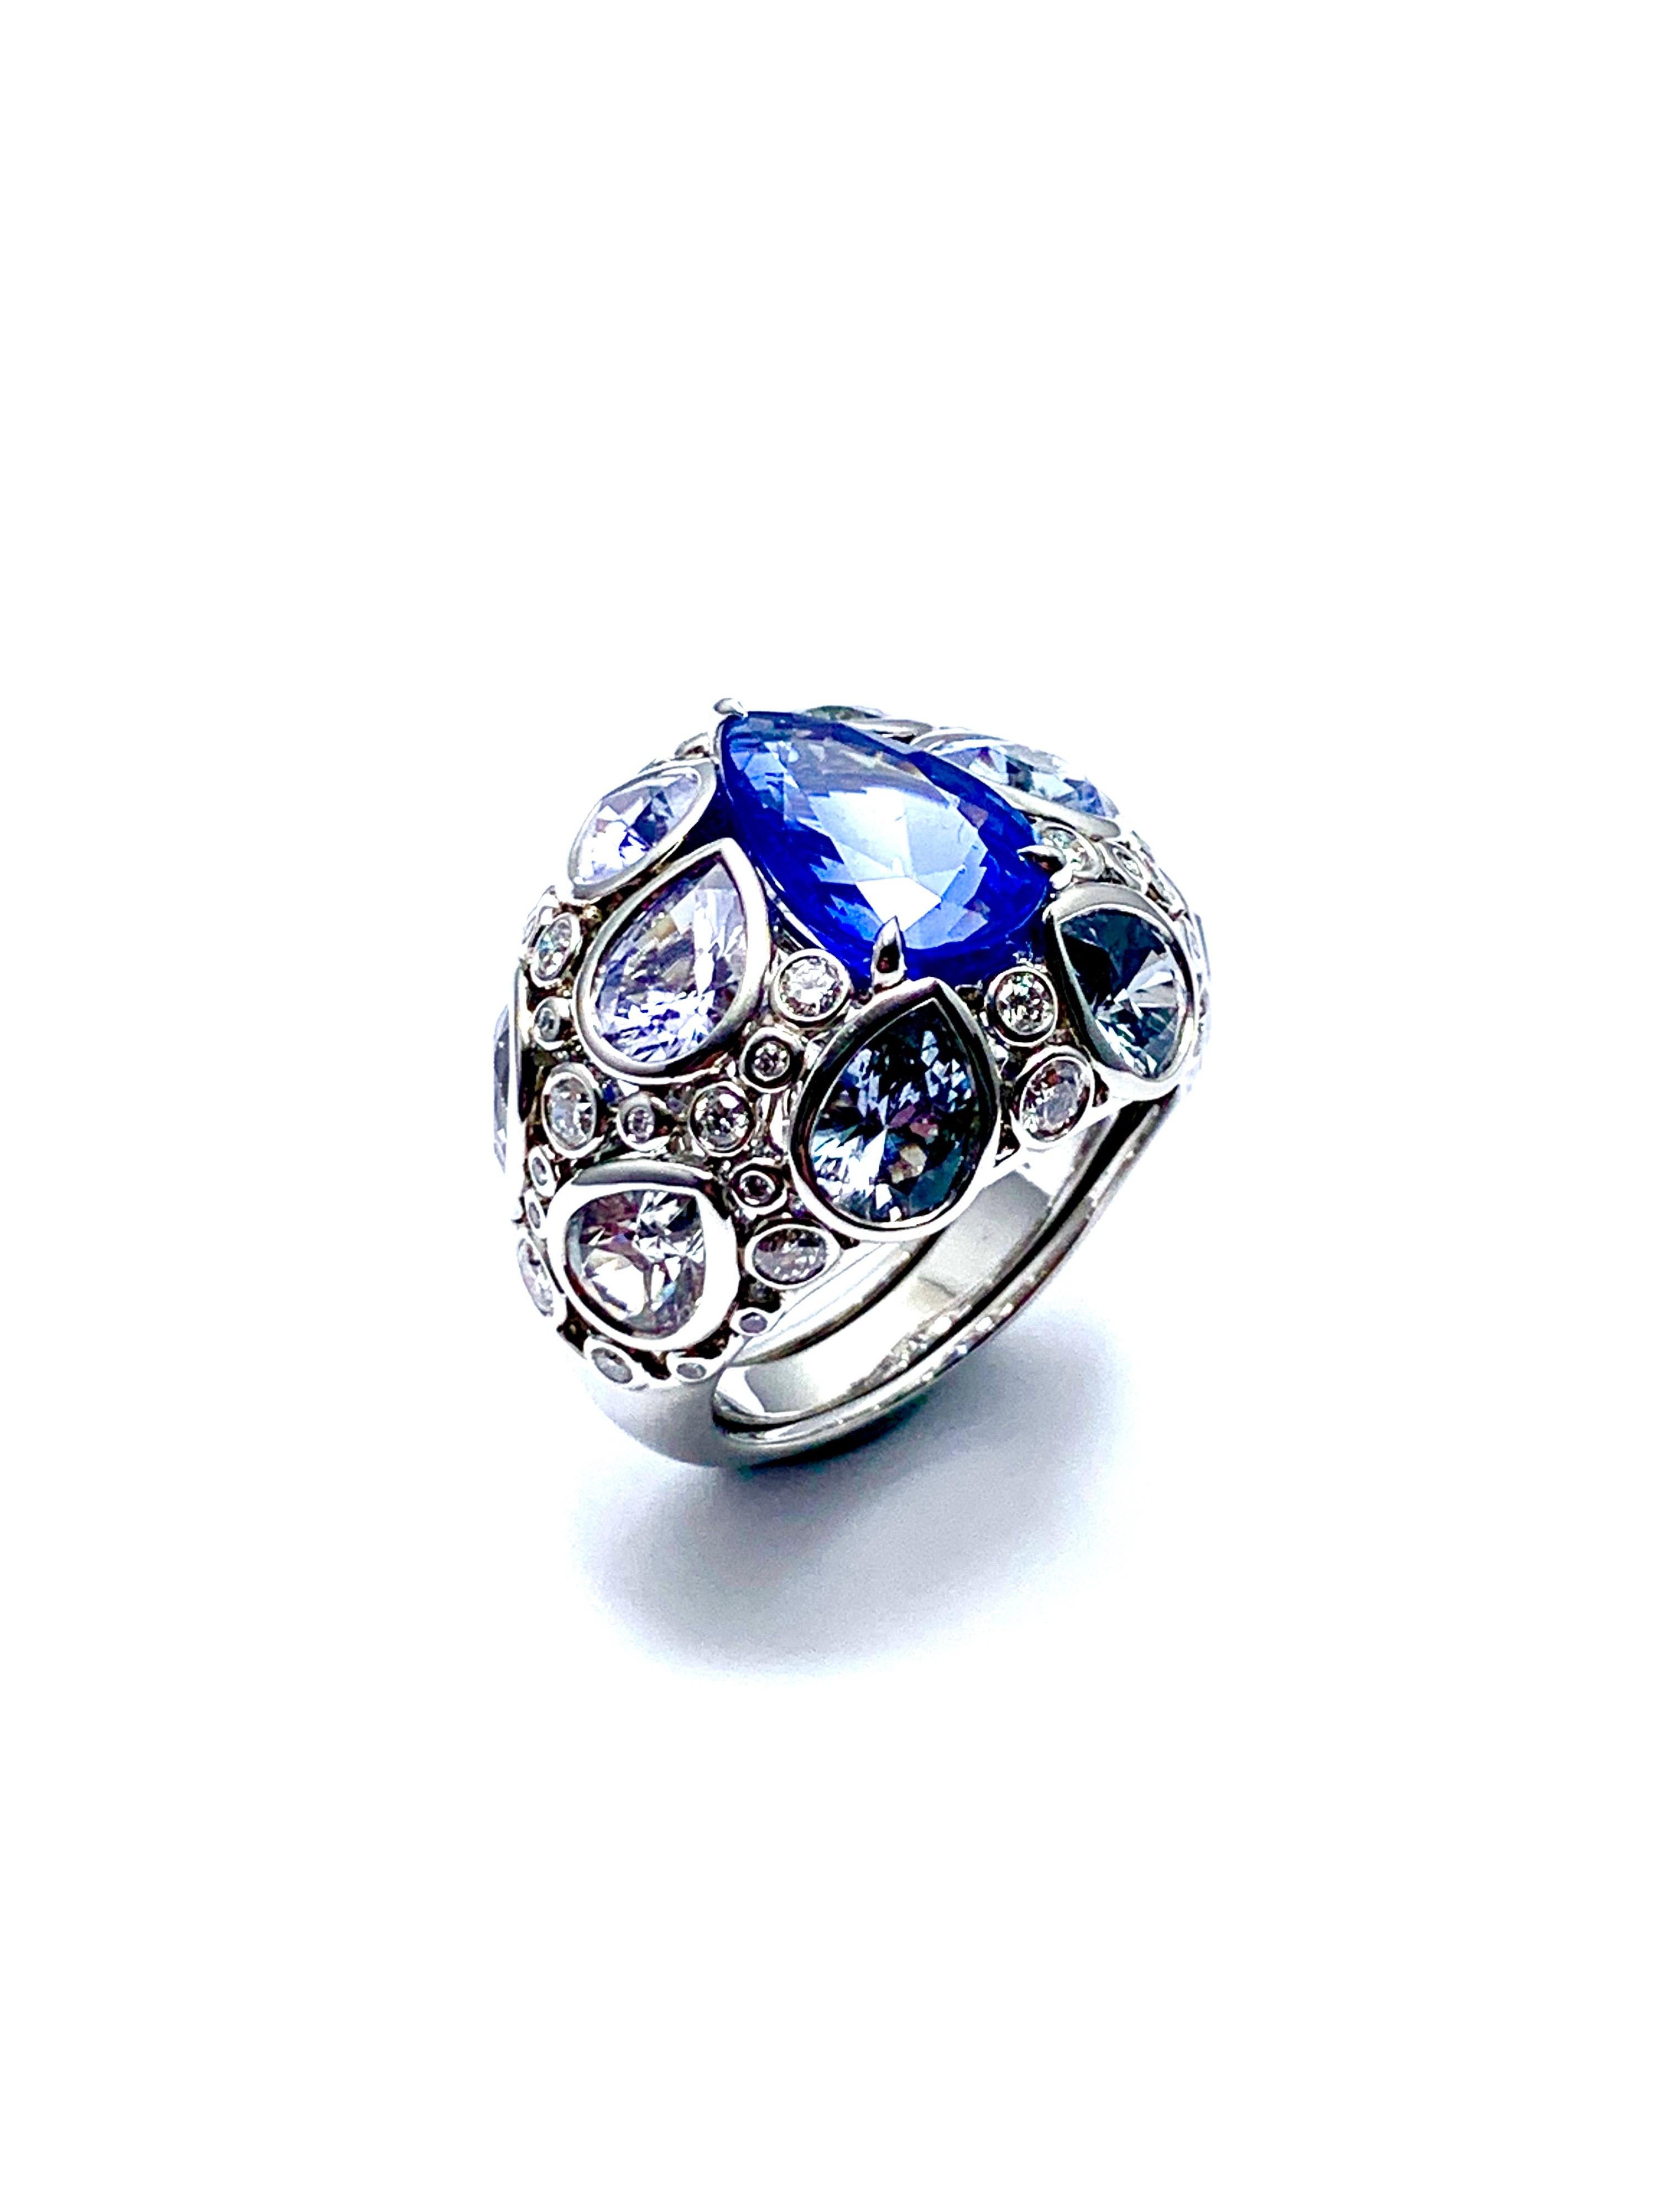 An absolutely gorgeous Robert Procop De La Vie Collection cocktail ring! The ring is handcrafted in platinum with a stunning 4.58 carat pear shape sapphire set with light blue pear shape sapphires, and round brilliant diamonds. There are 10  light